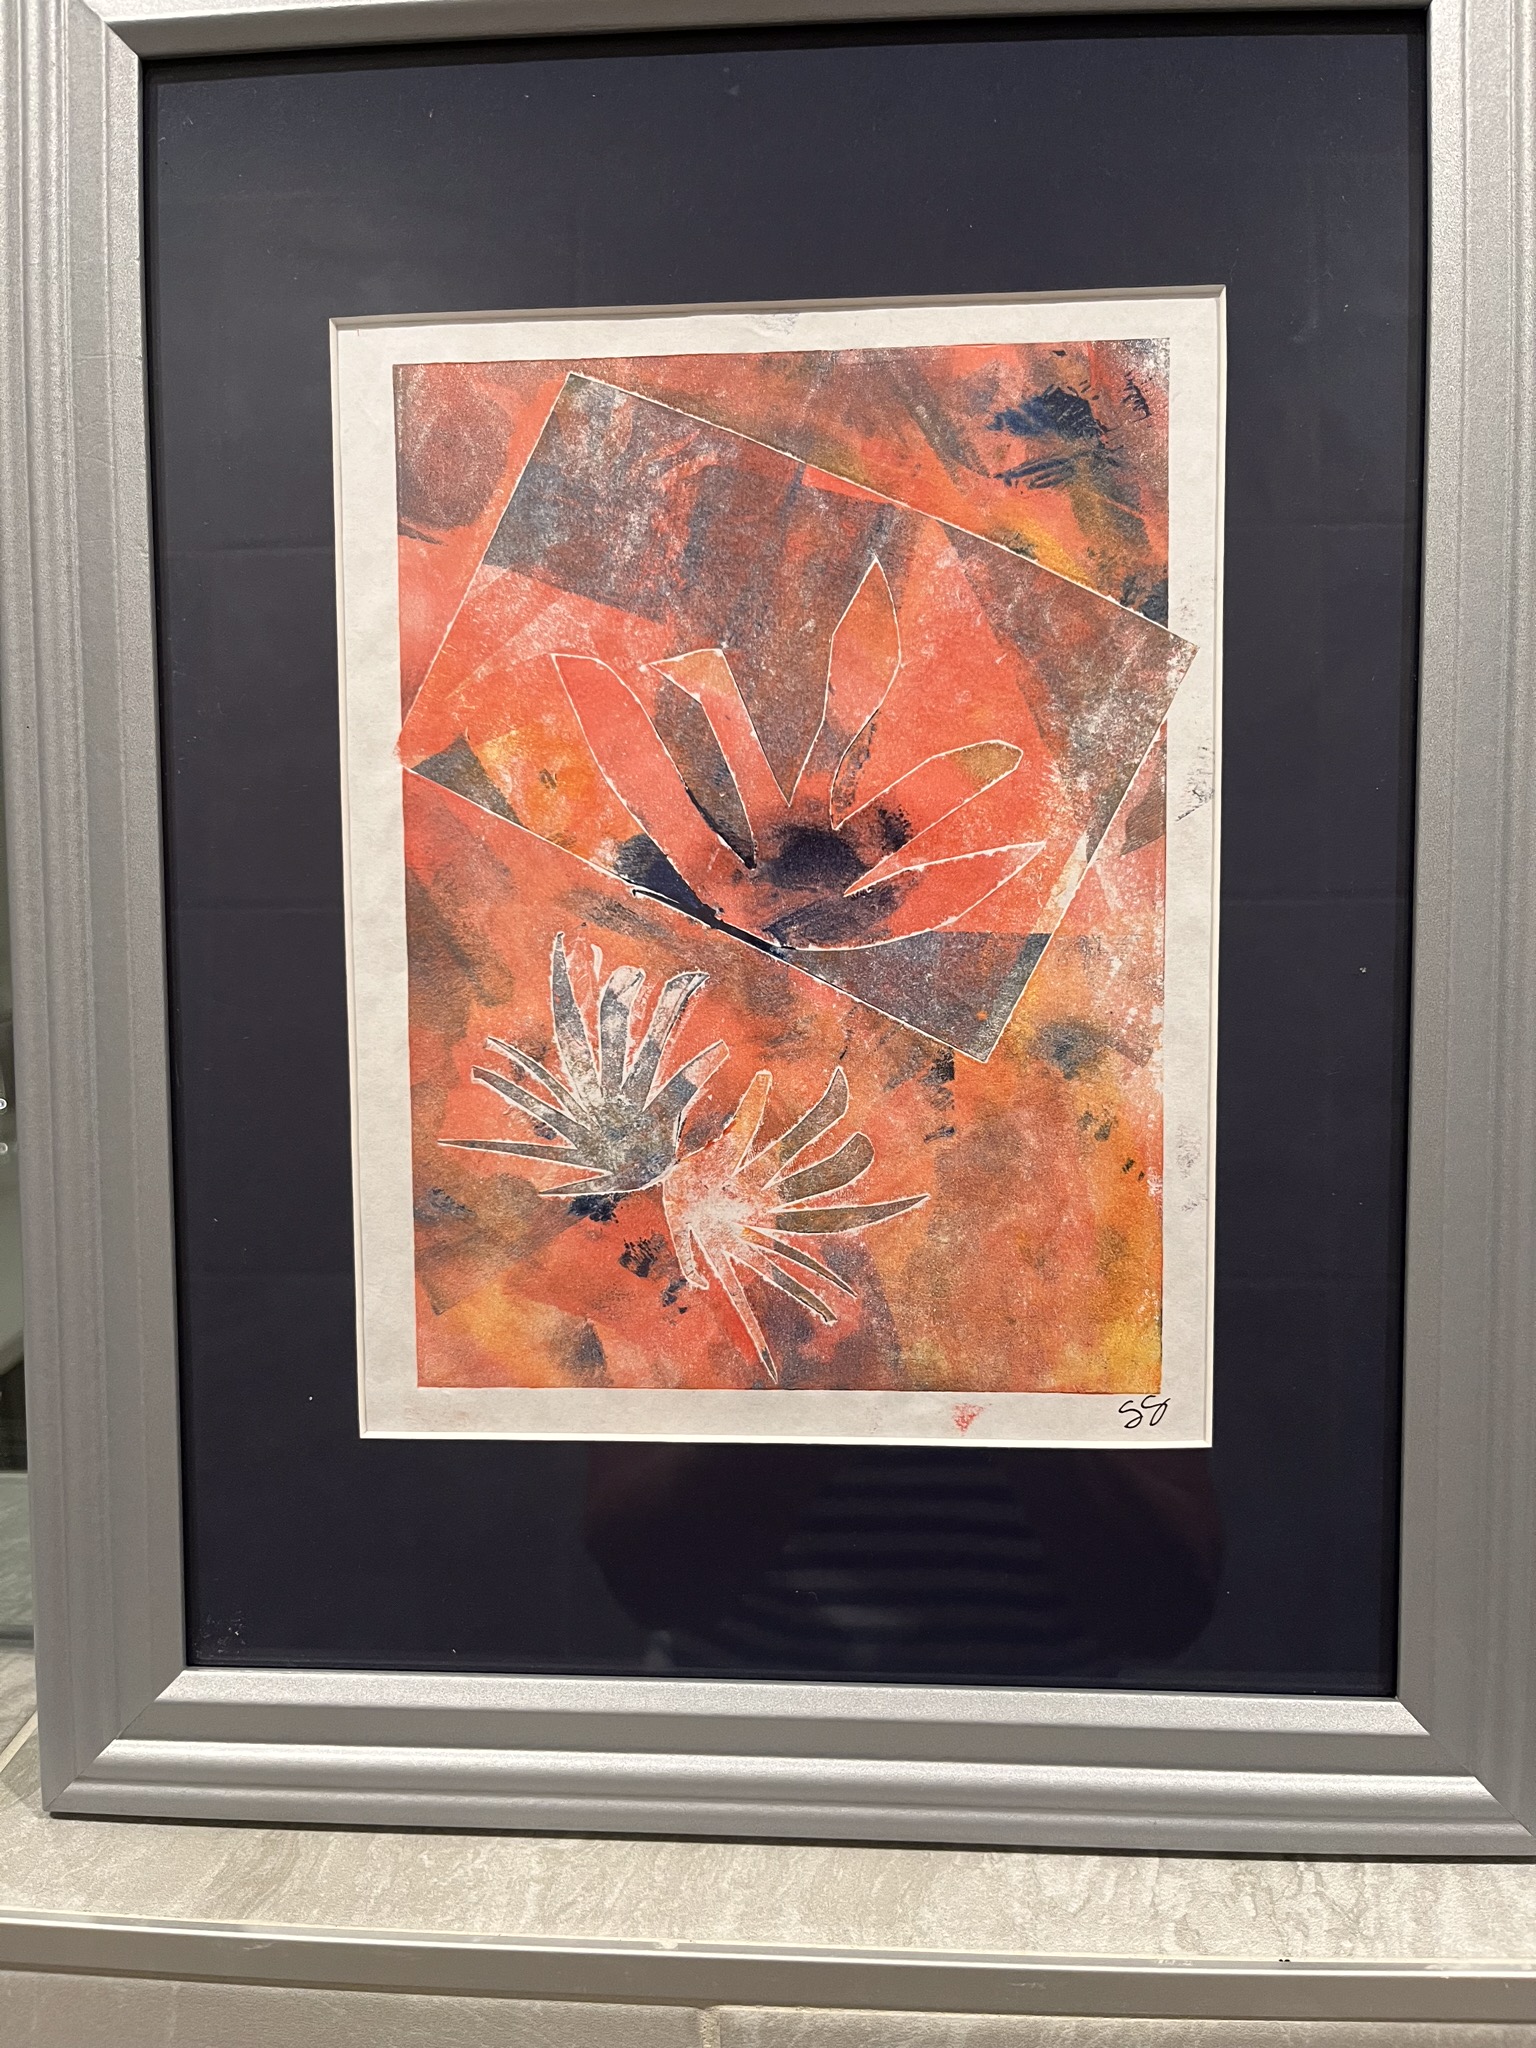 A framed monoprint. The monoprint is many shades of orange and appears to have leaves scattered about. 